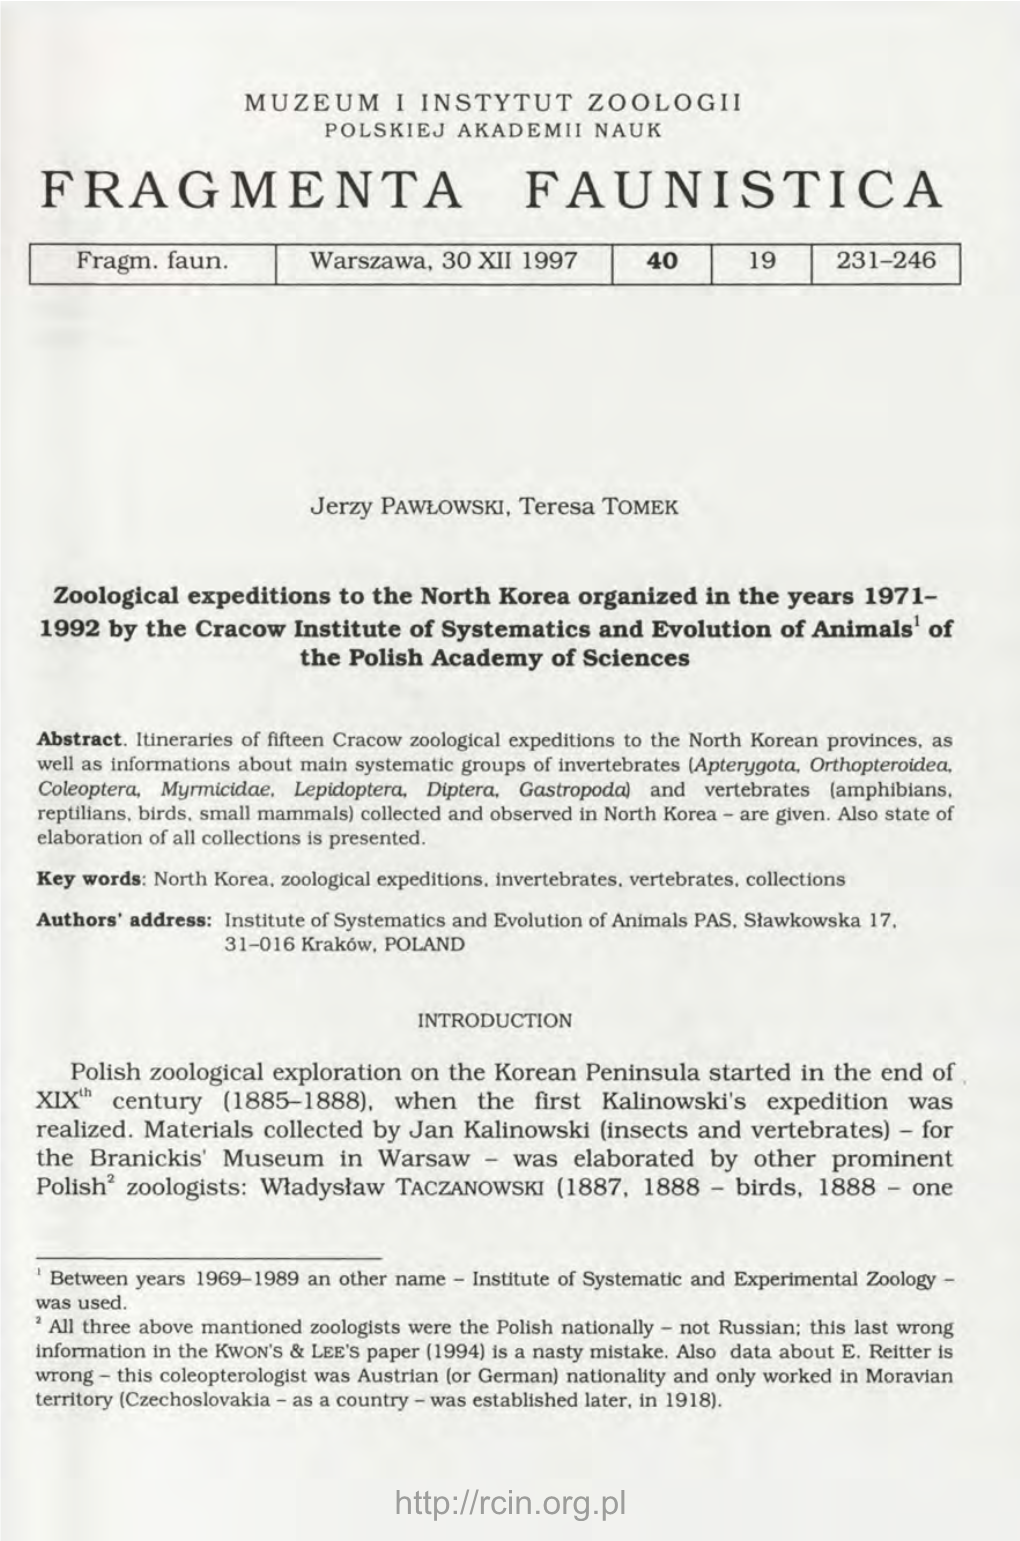 Zoological Expeditions to the North Korea Organized in the Years 1971